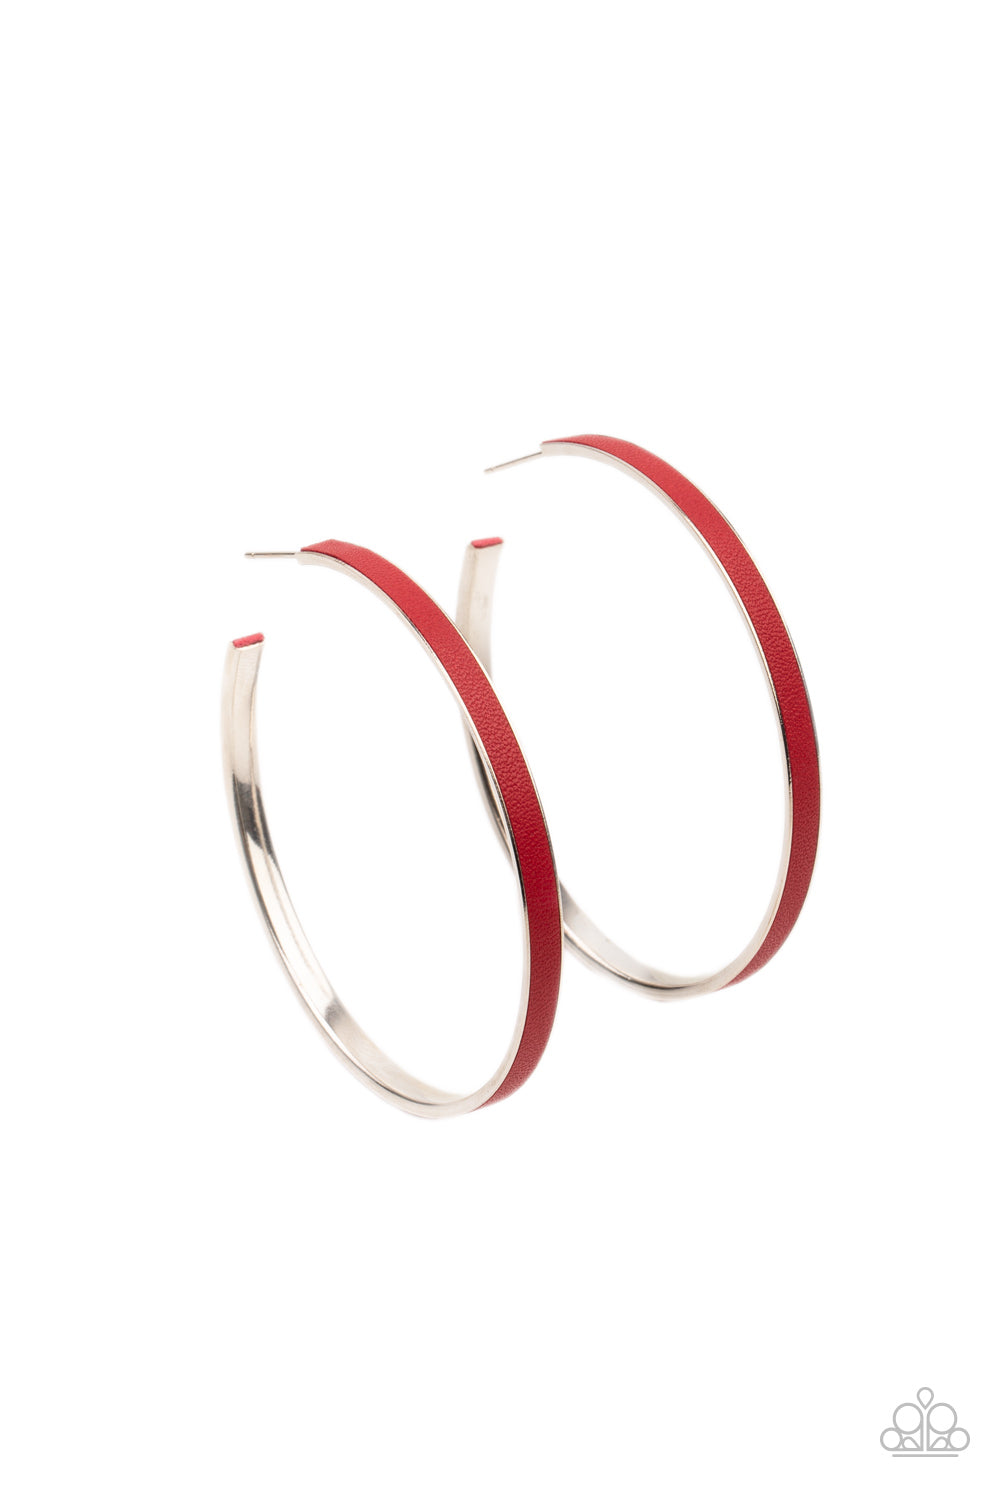 Fearless Flavor - Red Leather Hoop Earrings red leather lace is pressed along the indented spine of a silver hoop, creating a bold pop of color. Earring attaches to a standard post fitting. Hoop measures approximately 2 1/4" in diameter.  Sold as one pair of hoop earrings.  Paparazzi Jewelry is lead and nickel free so it's perfect for sensitive skin too!